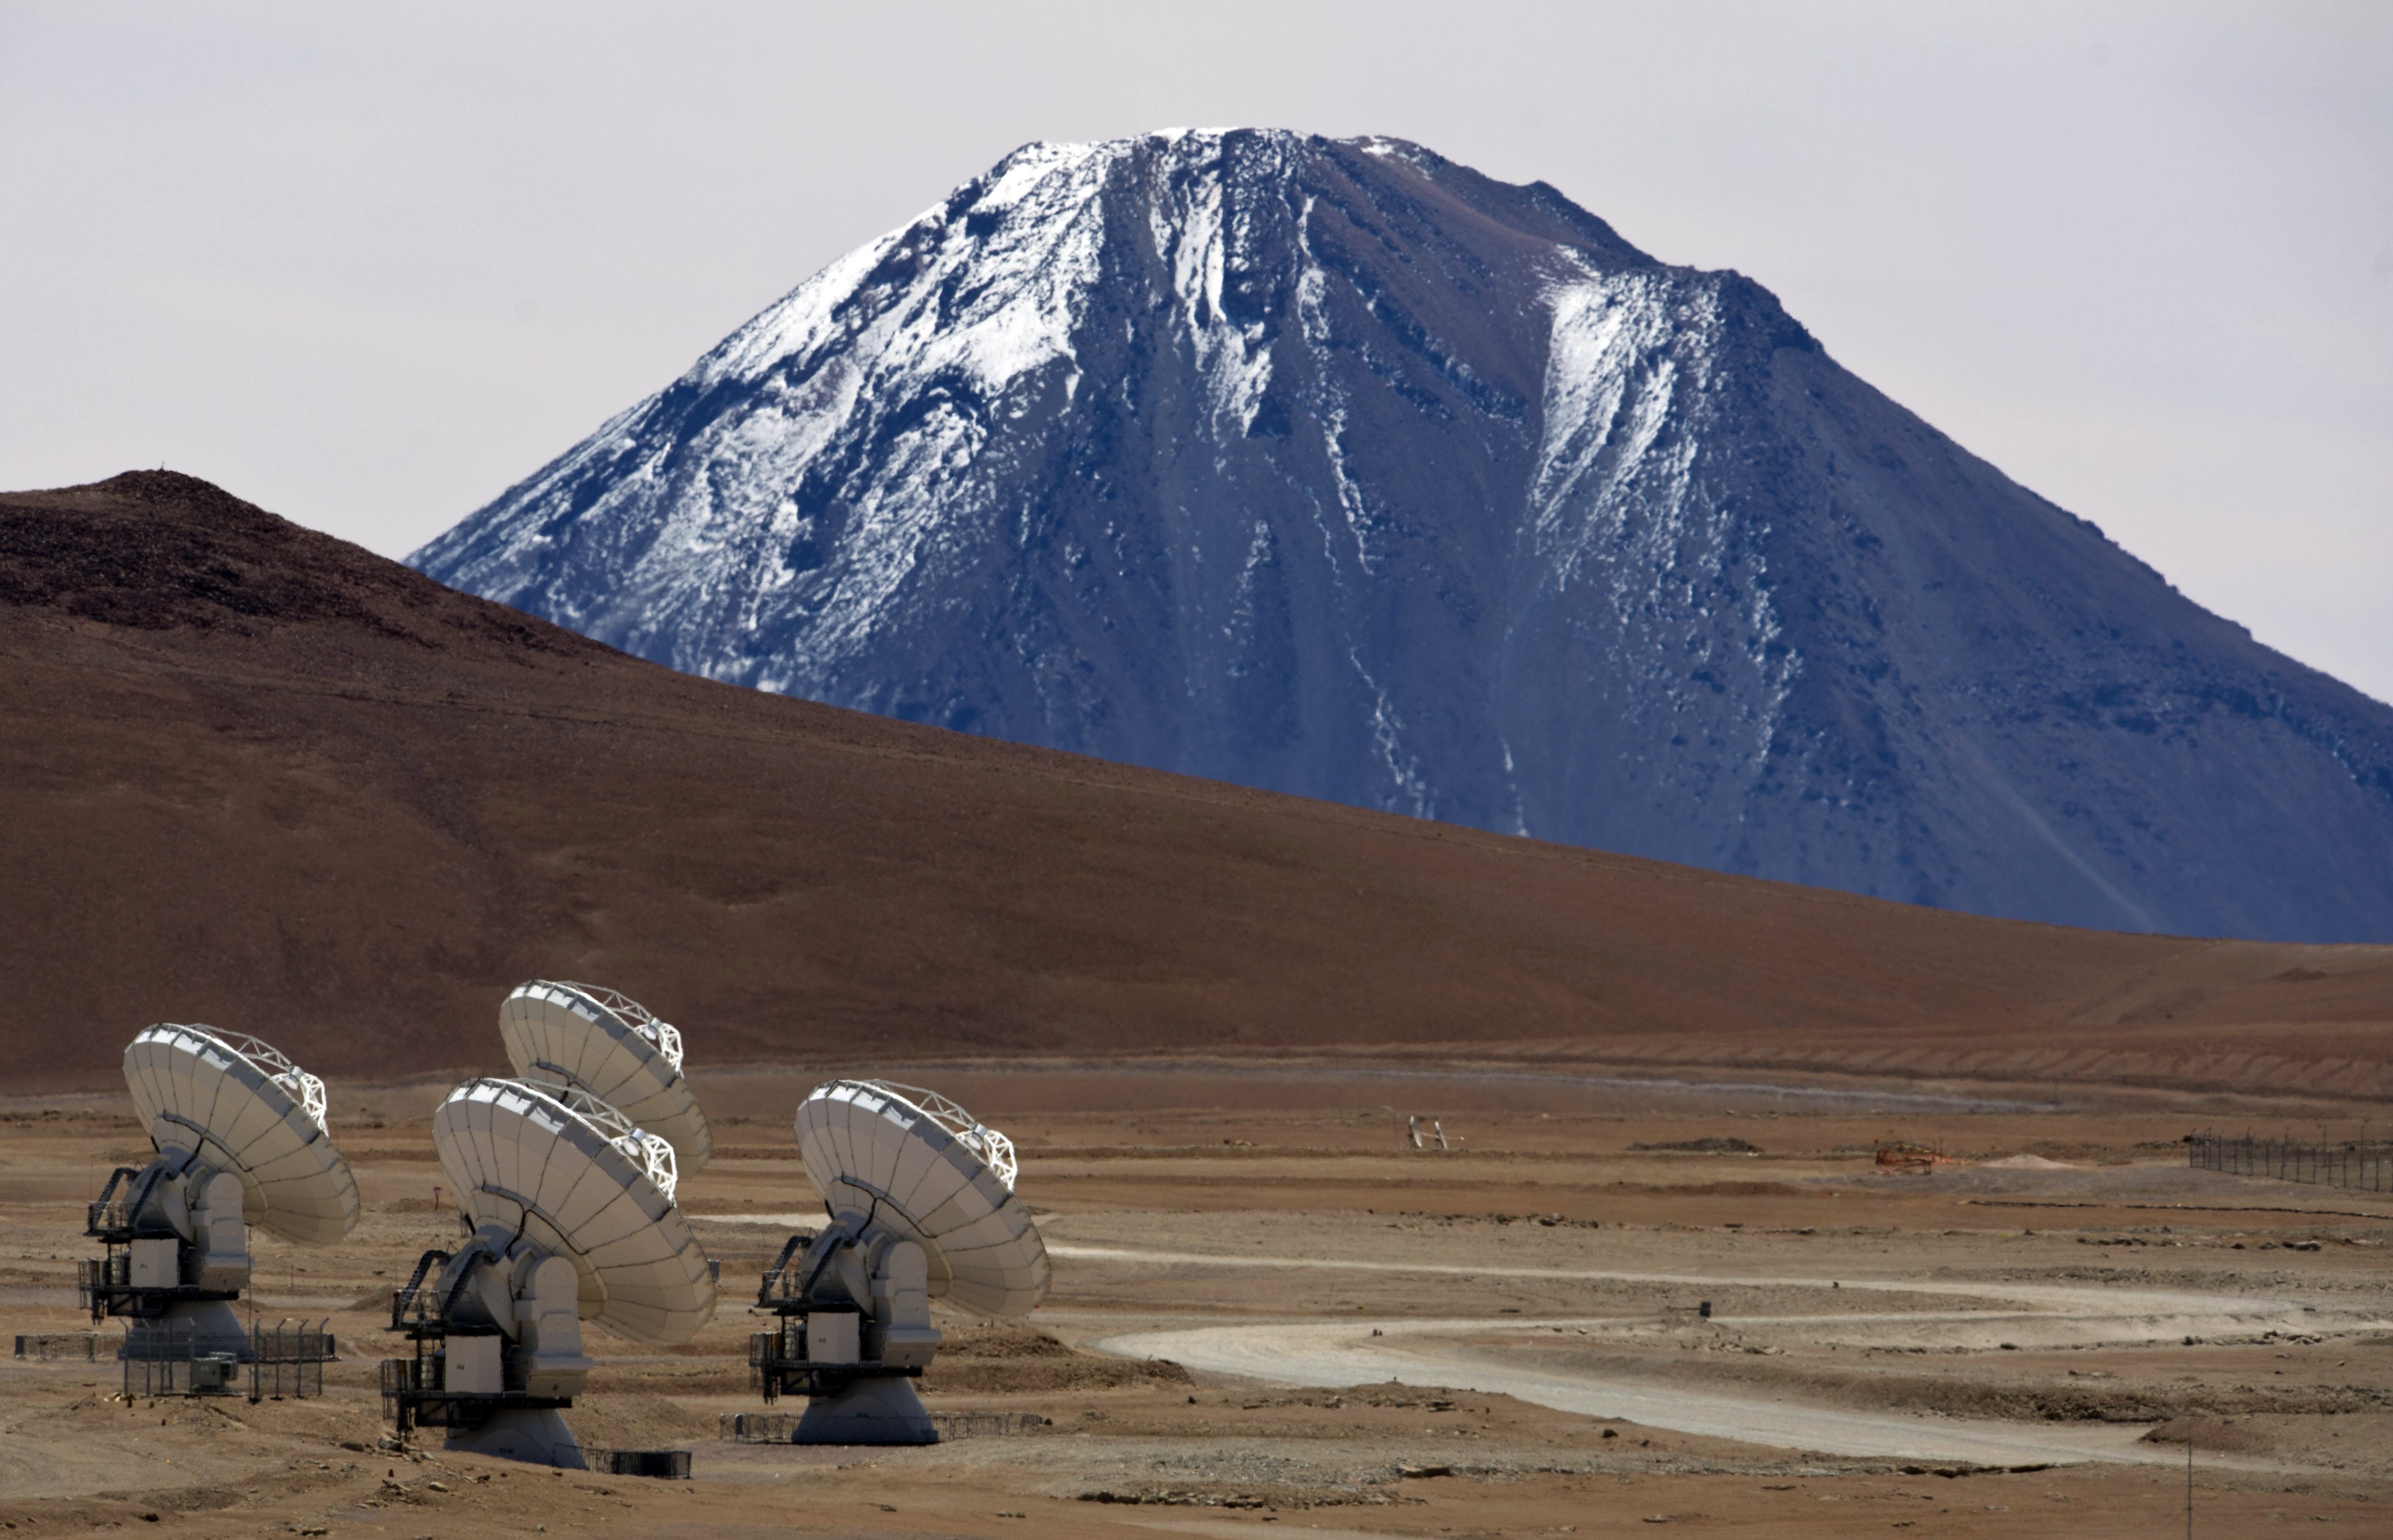 Part of the ALMA array in Chile. (Photo: MARTIN BERNETTI/AFP, Getty Images)